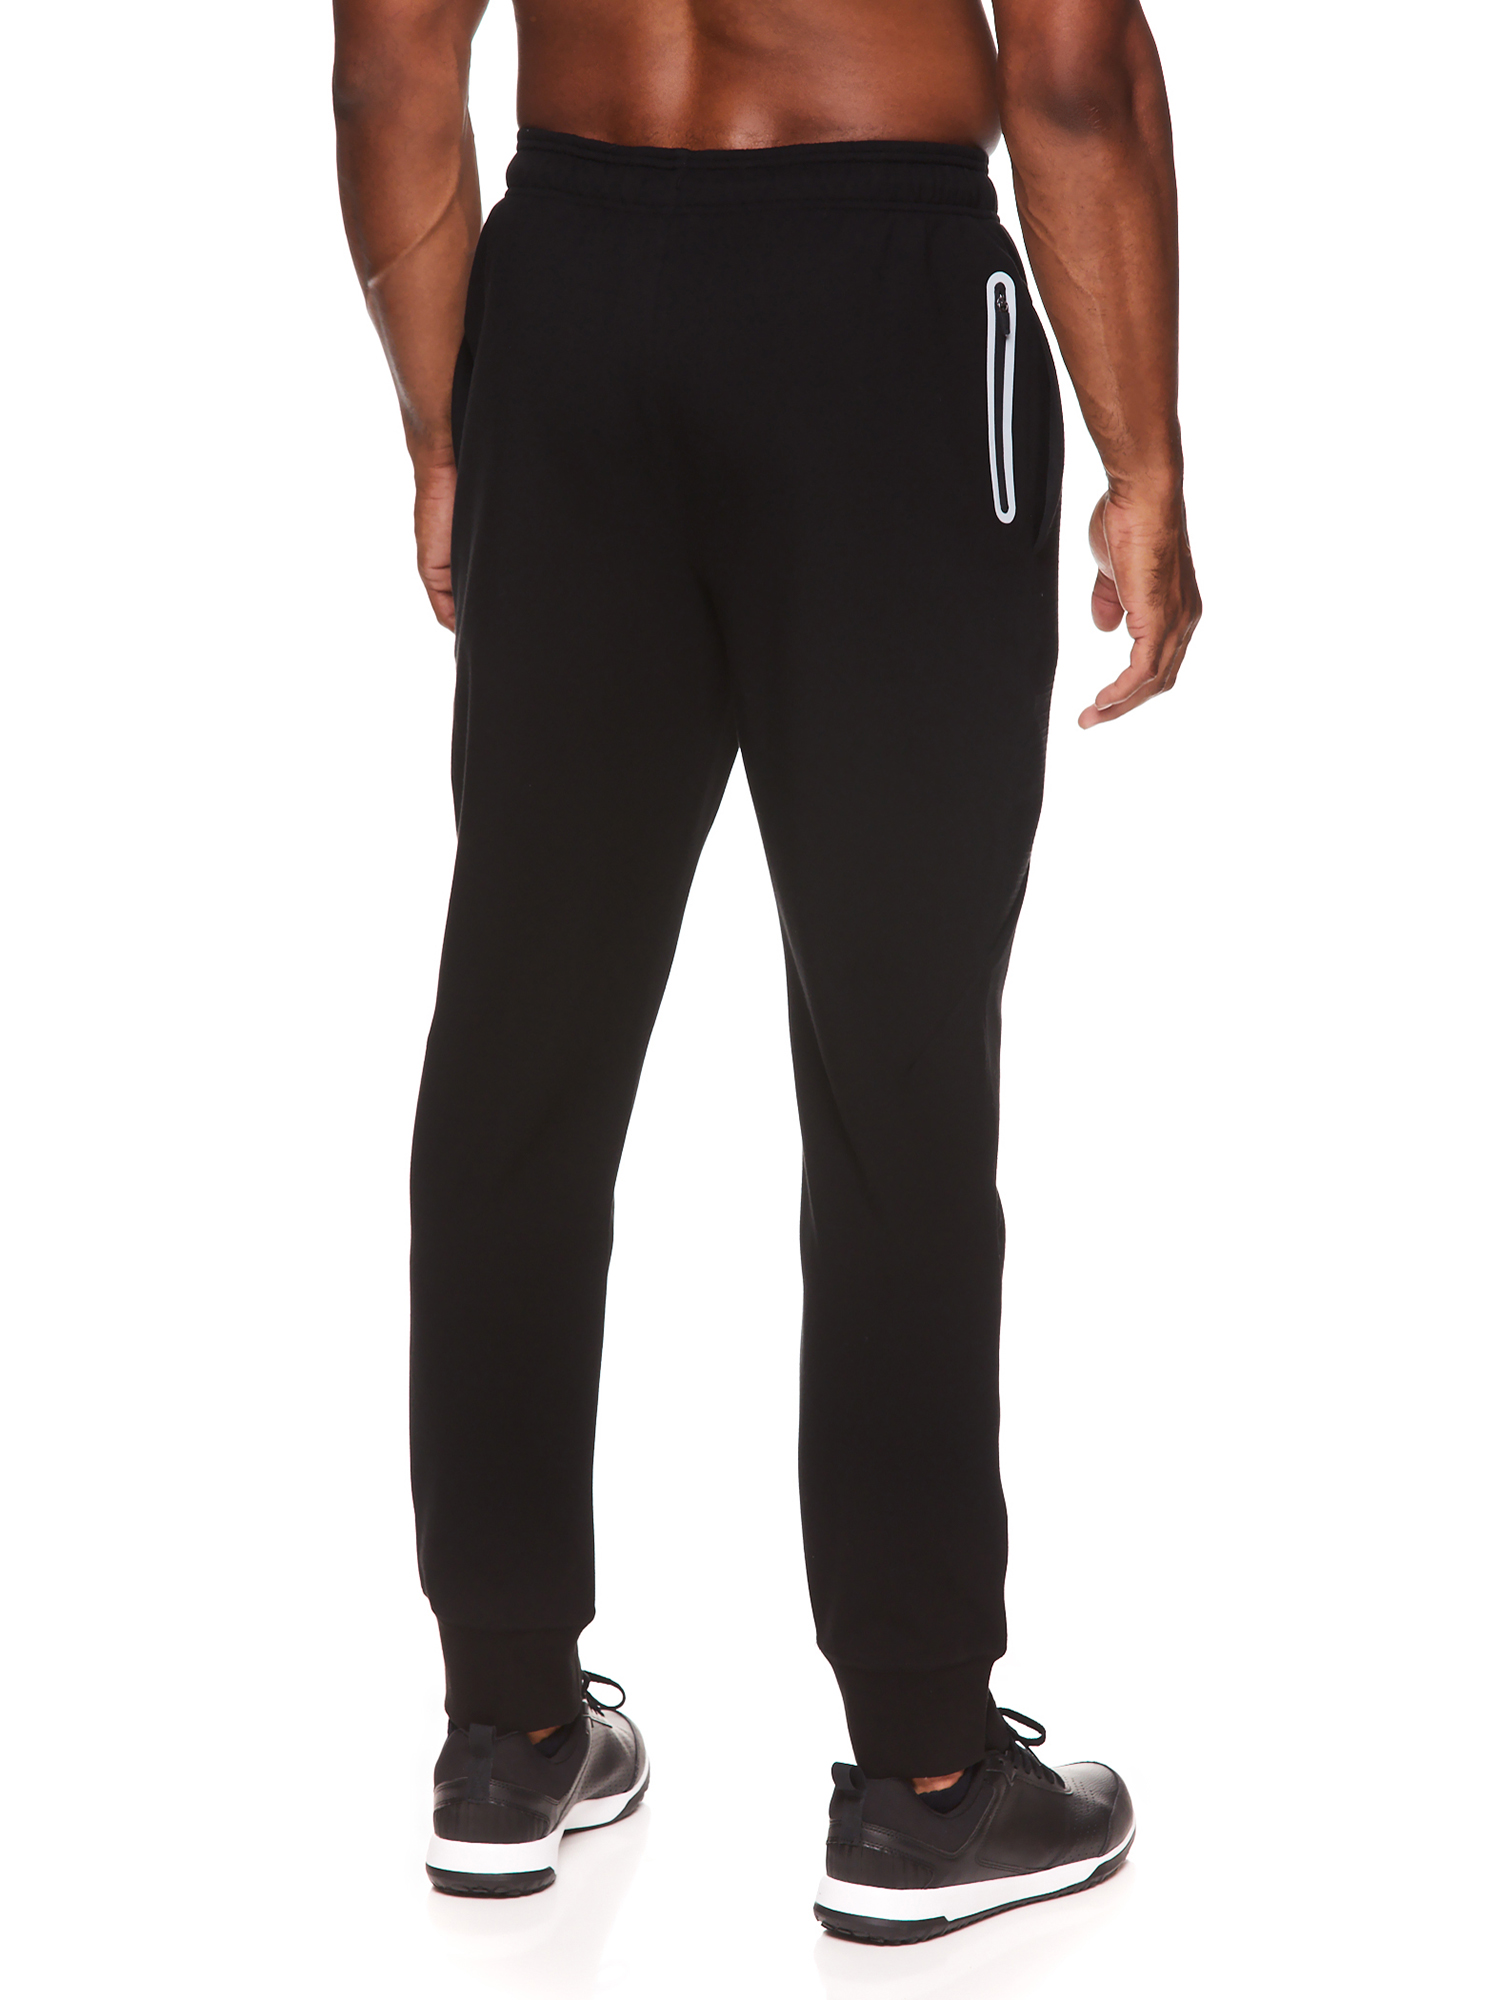 Reebok Men's and Big Men's Active Skybox Pant, up to Size 3XL - image 2 of 4